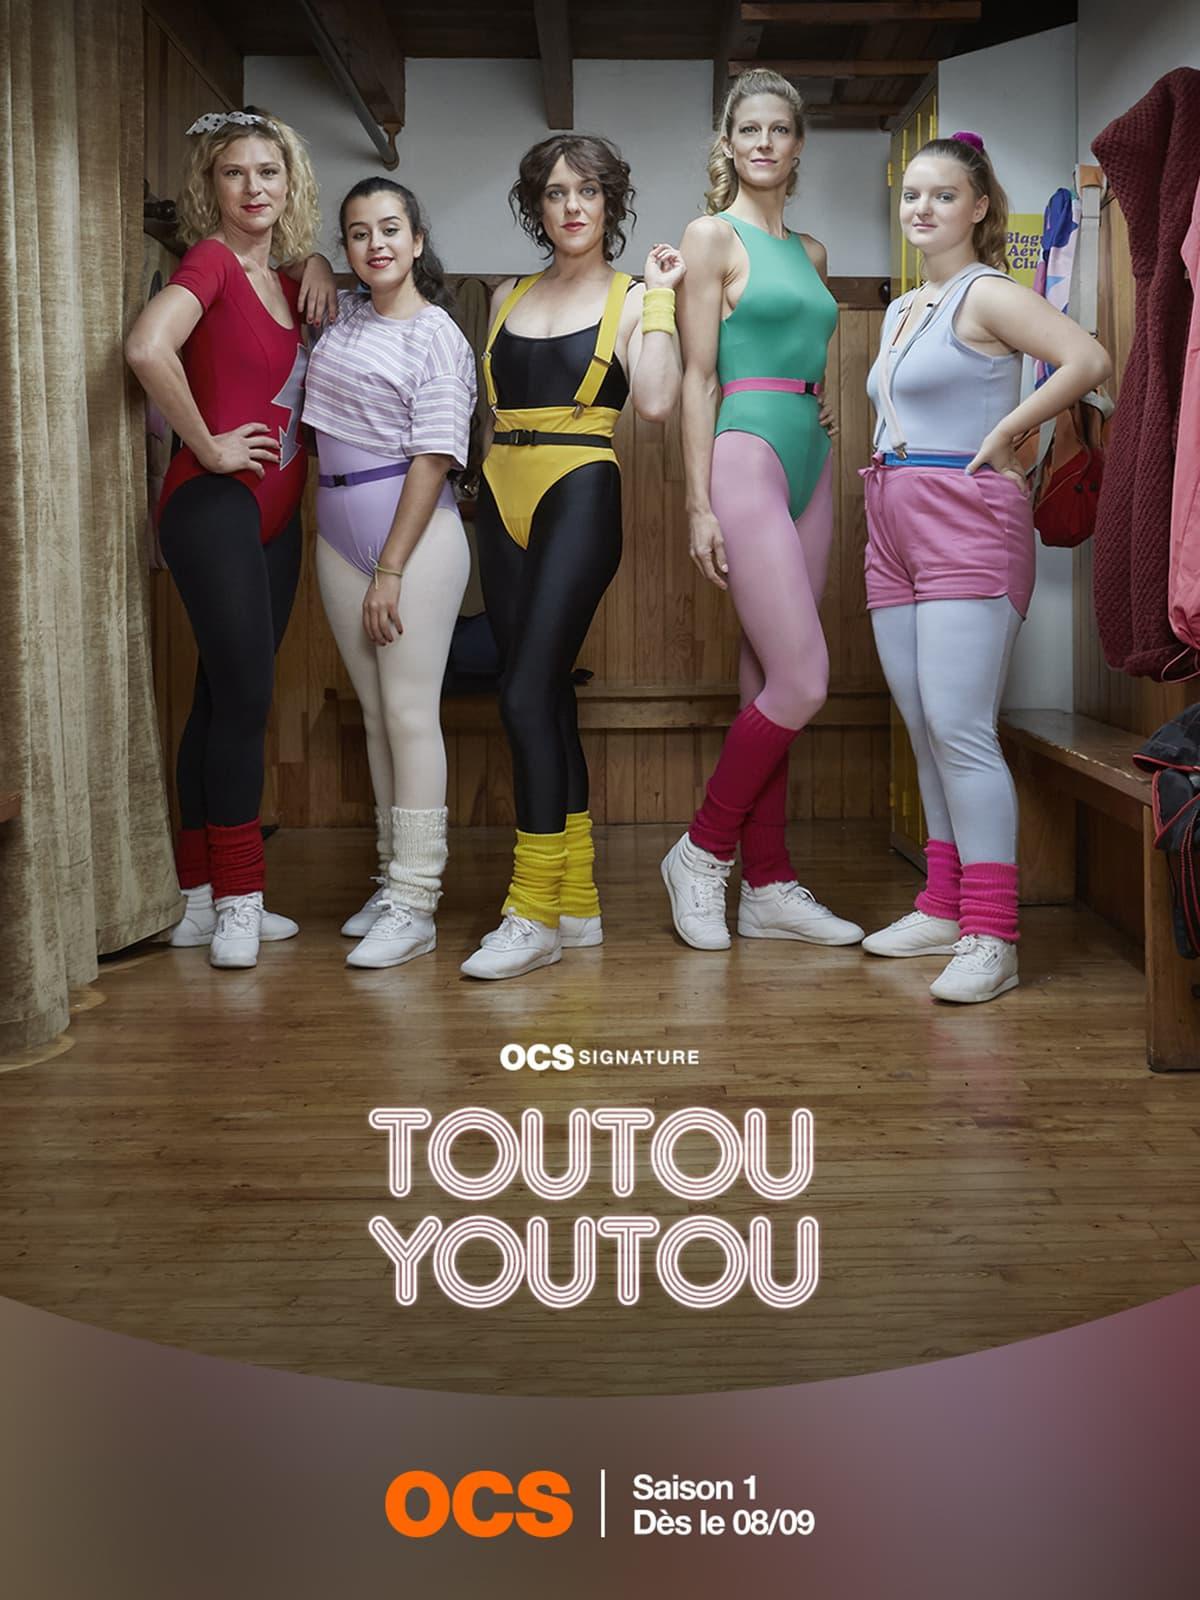 TV ratings for Toutouyoutou in France. OCS TV series